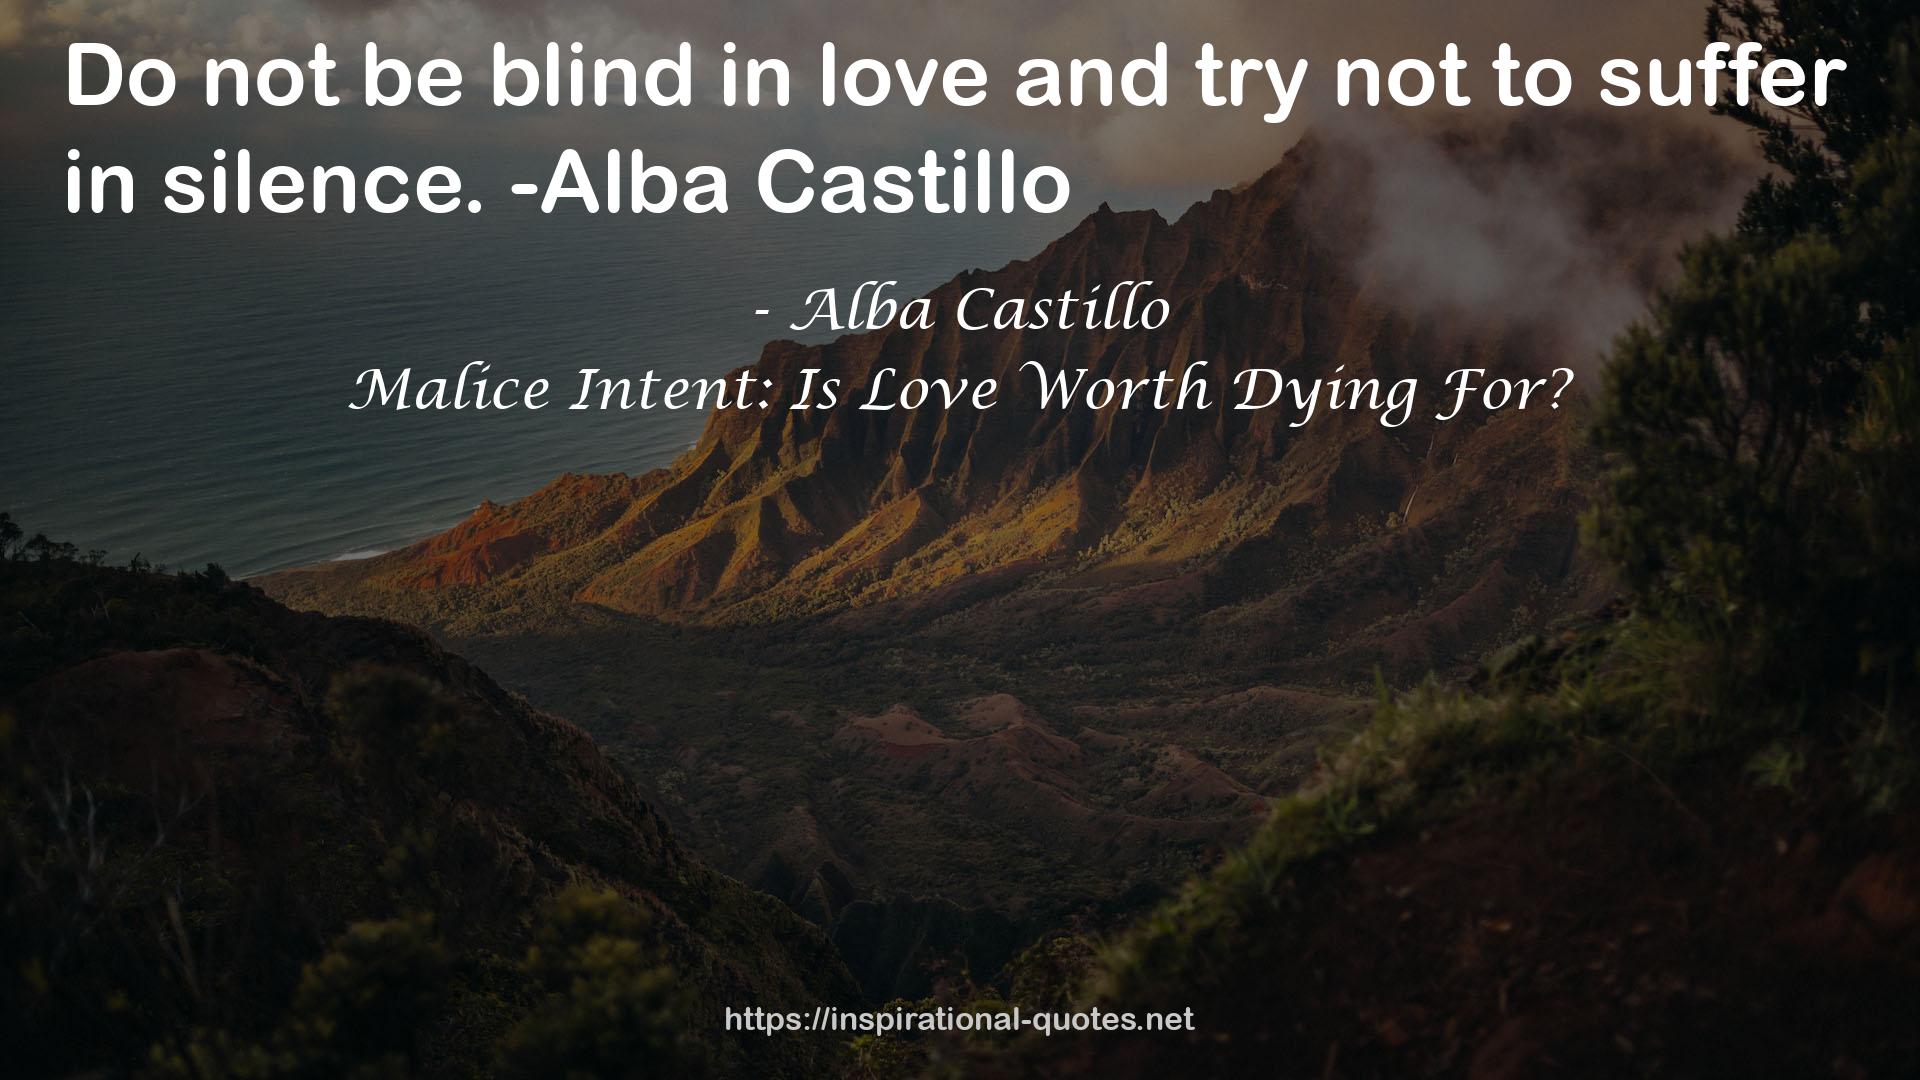 Malice Intent: Is Love Worth Dying For? QUOTES